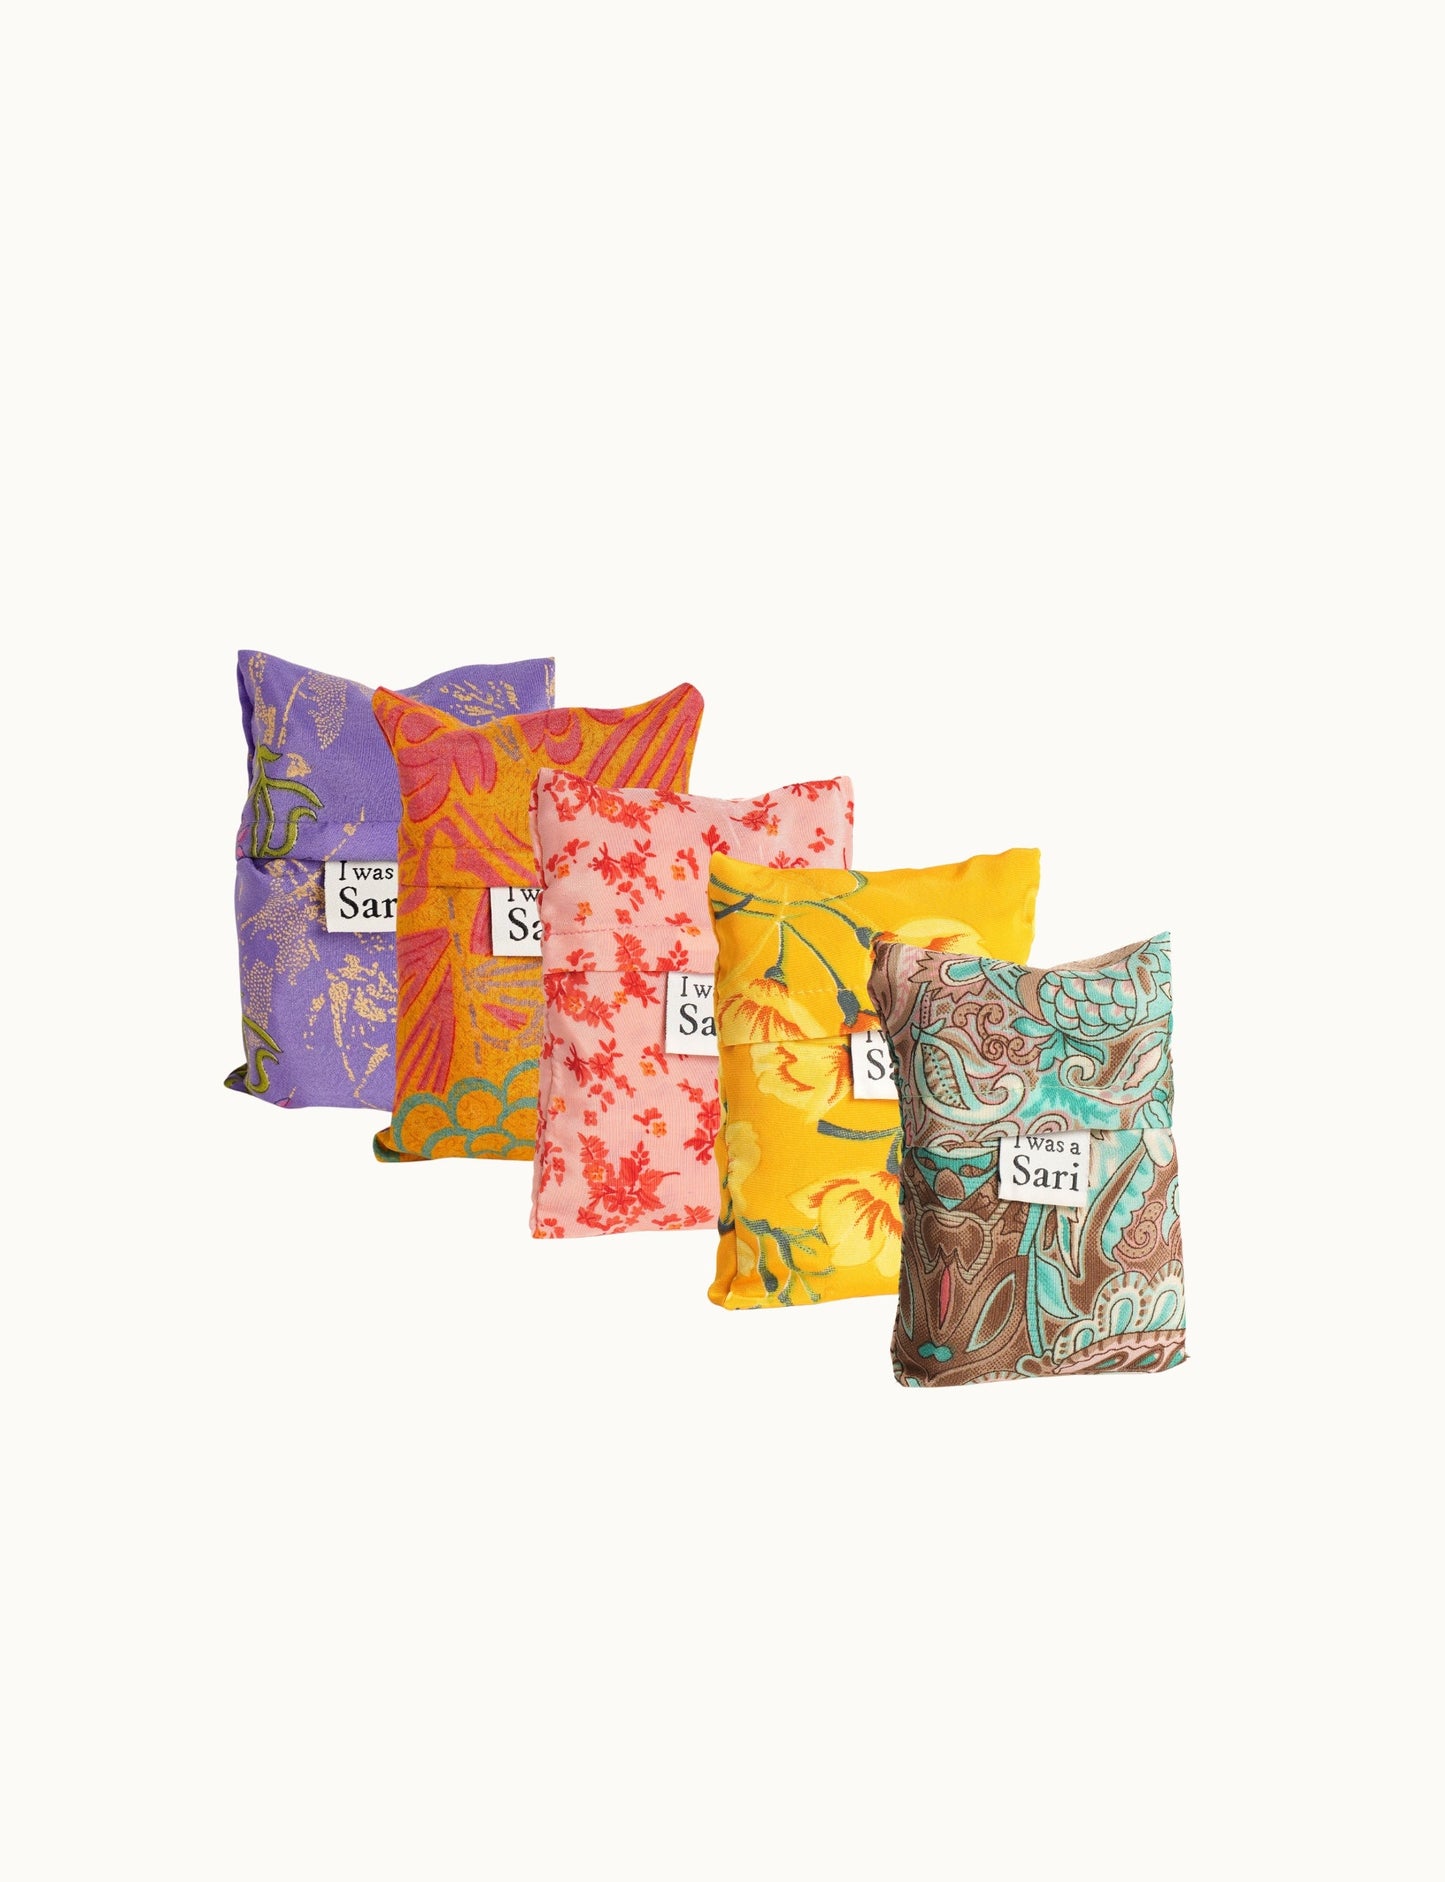 Stay eco-conscious with our Reusable Bag, handmade by Indian artisans from pre-loved saris. Silky and lightweight, this foldaway bag is perfect for your on-the-go lifestyle. Available in a set of 5, each piece is a unique statement of ethical fashion, embracing sustainability and style